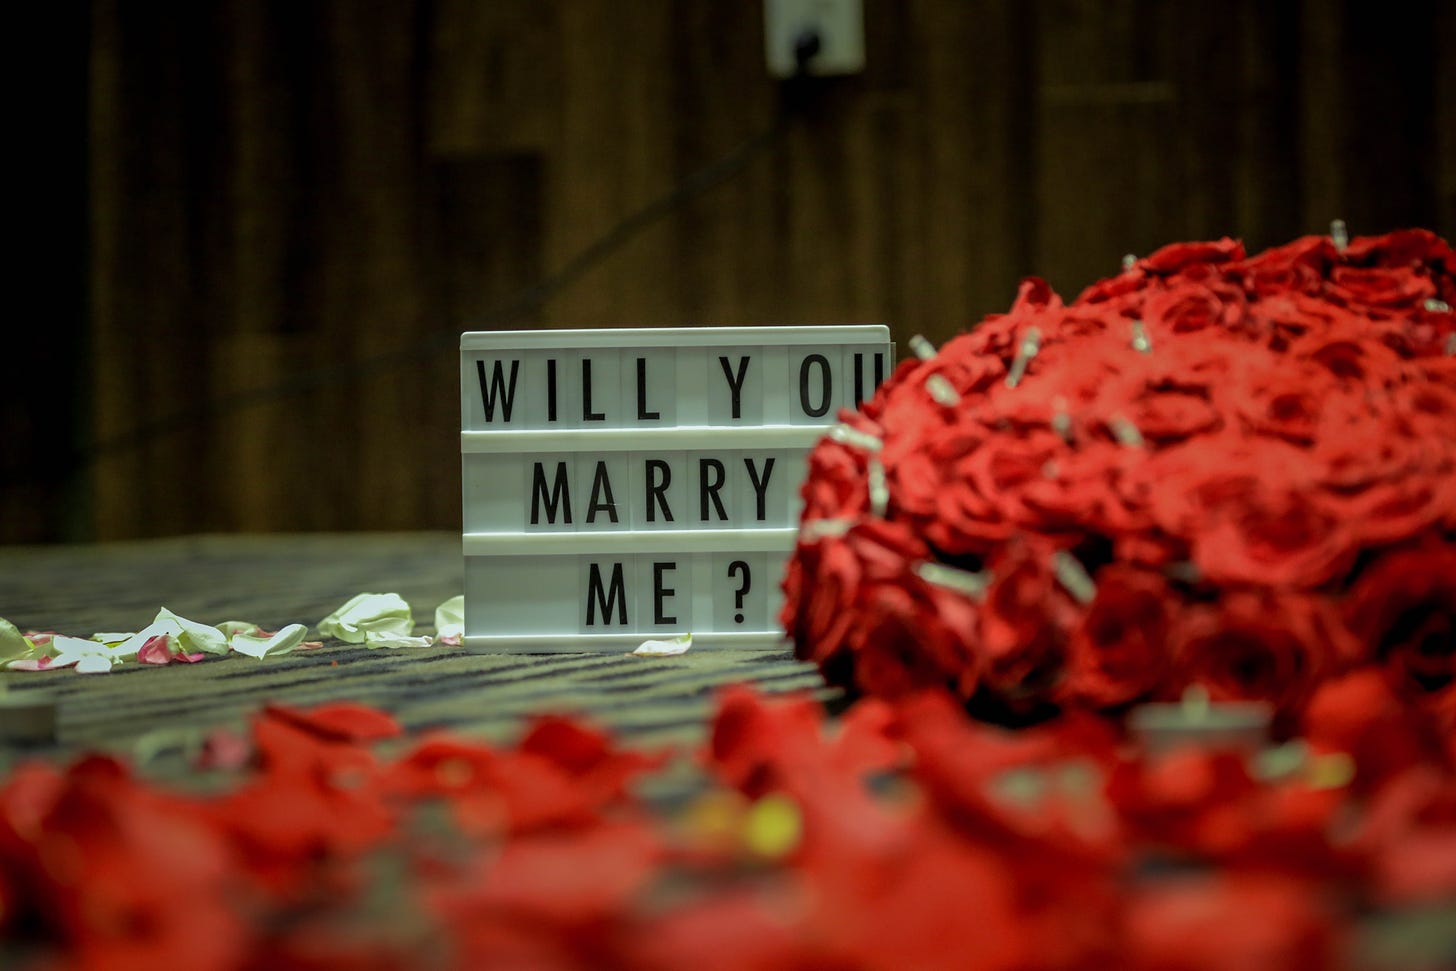 A sign that says "Will you marry me?" in block letters, next to a large bouquet of roses